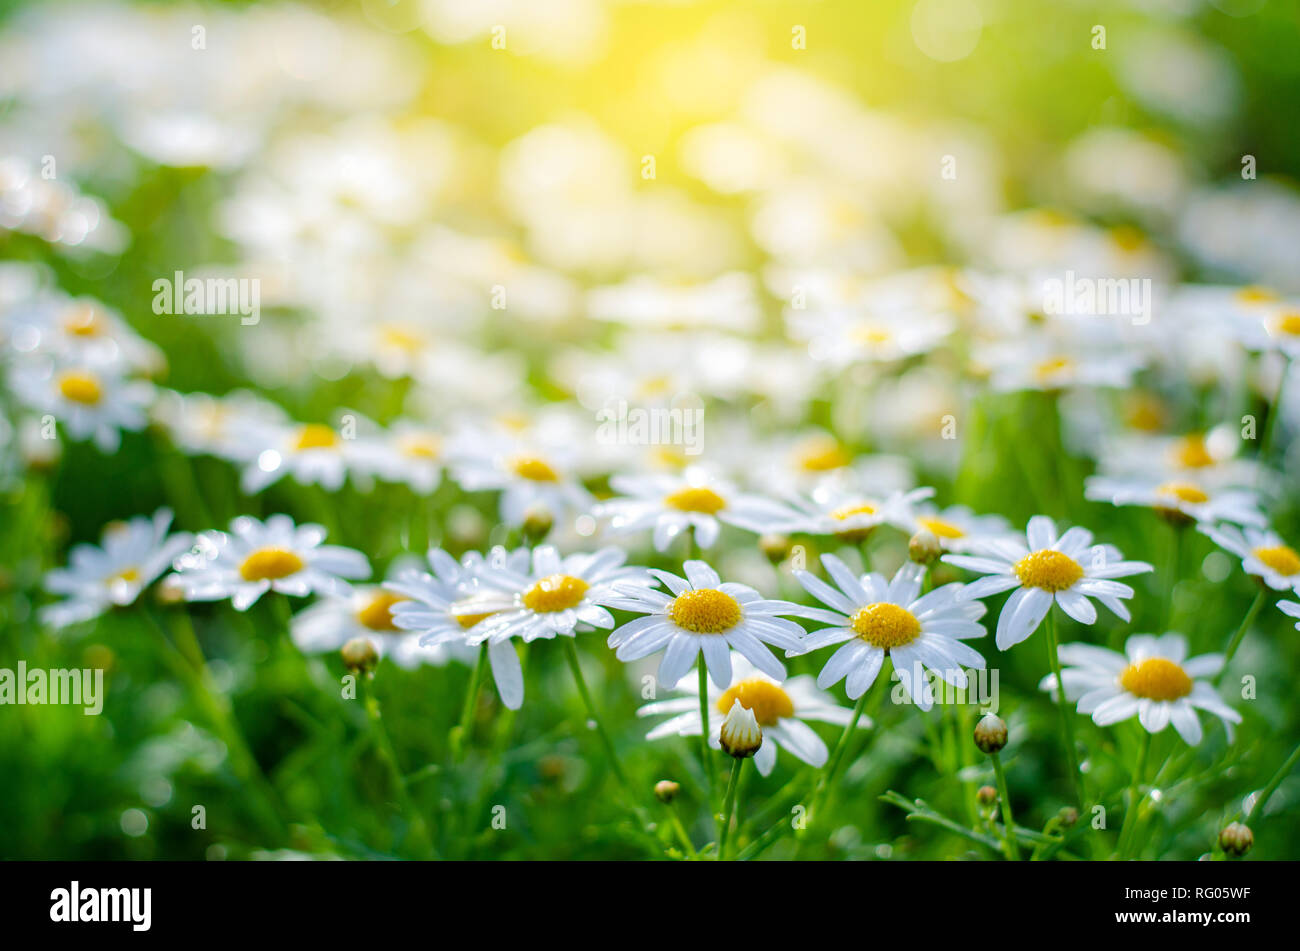 white pink flowers in the green grass fields With the sun shining Stock Photo